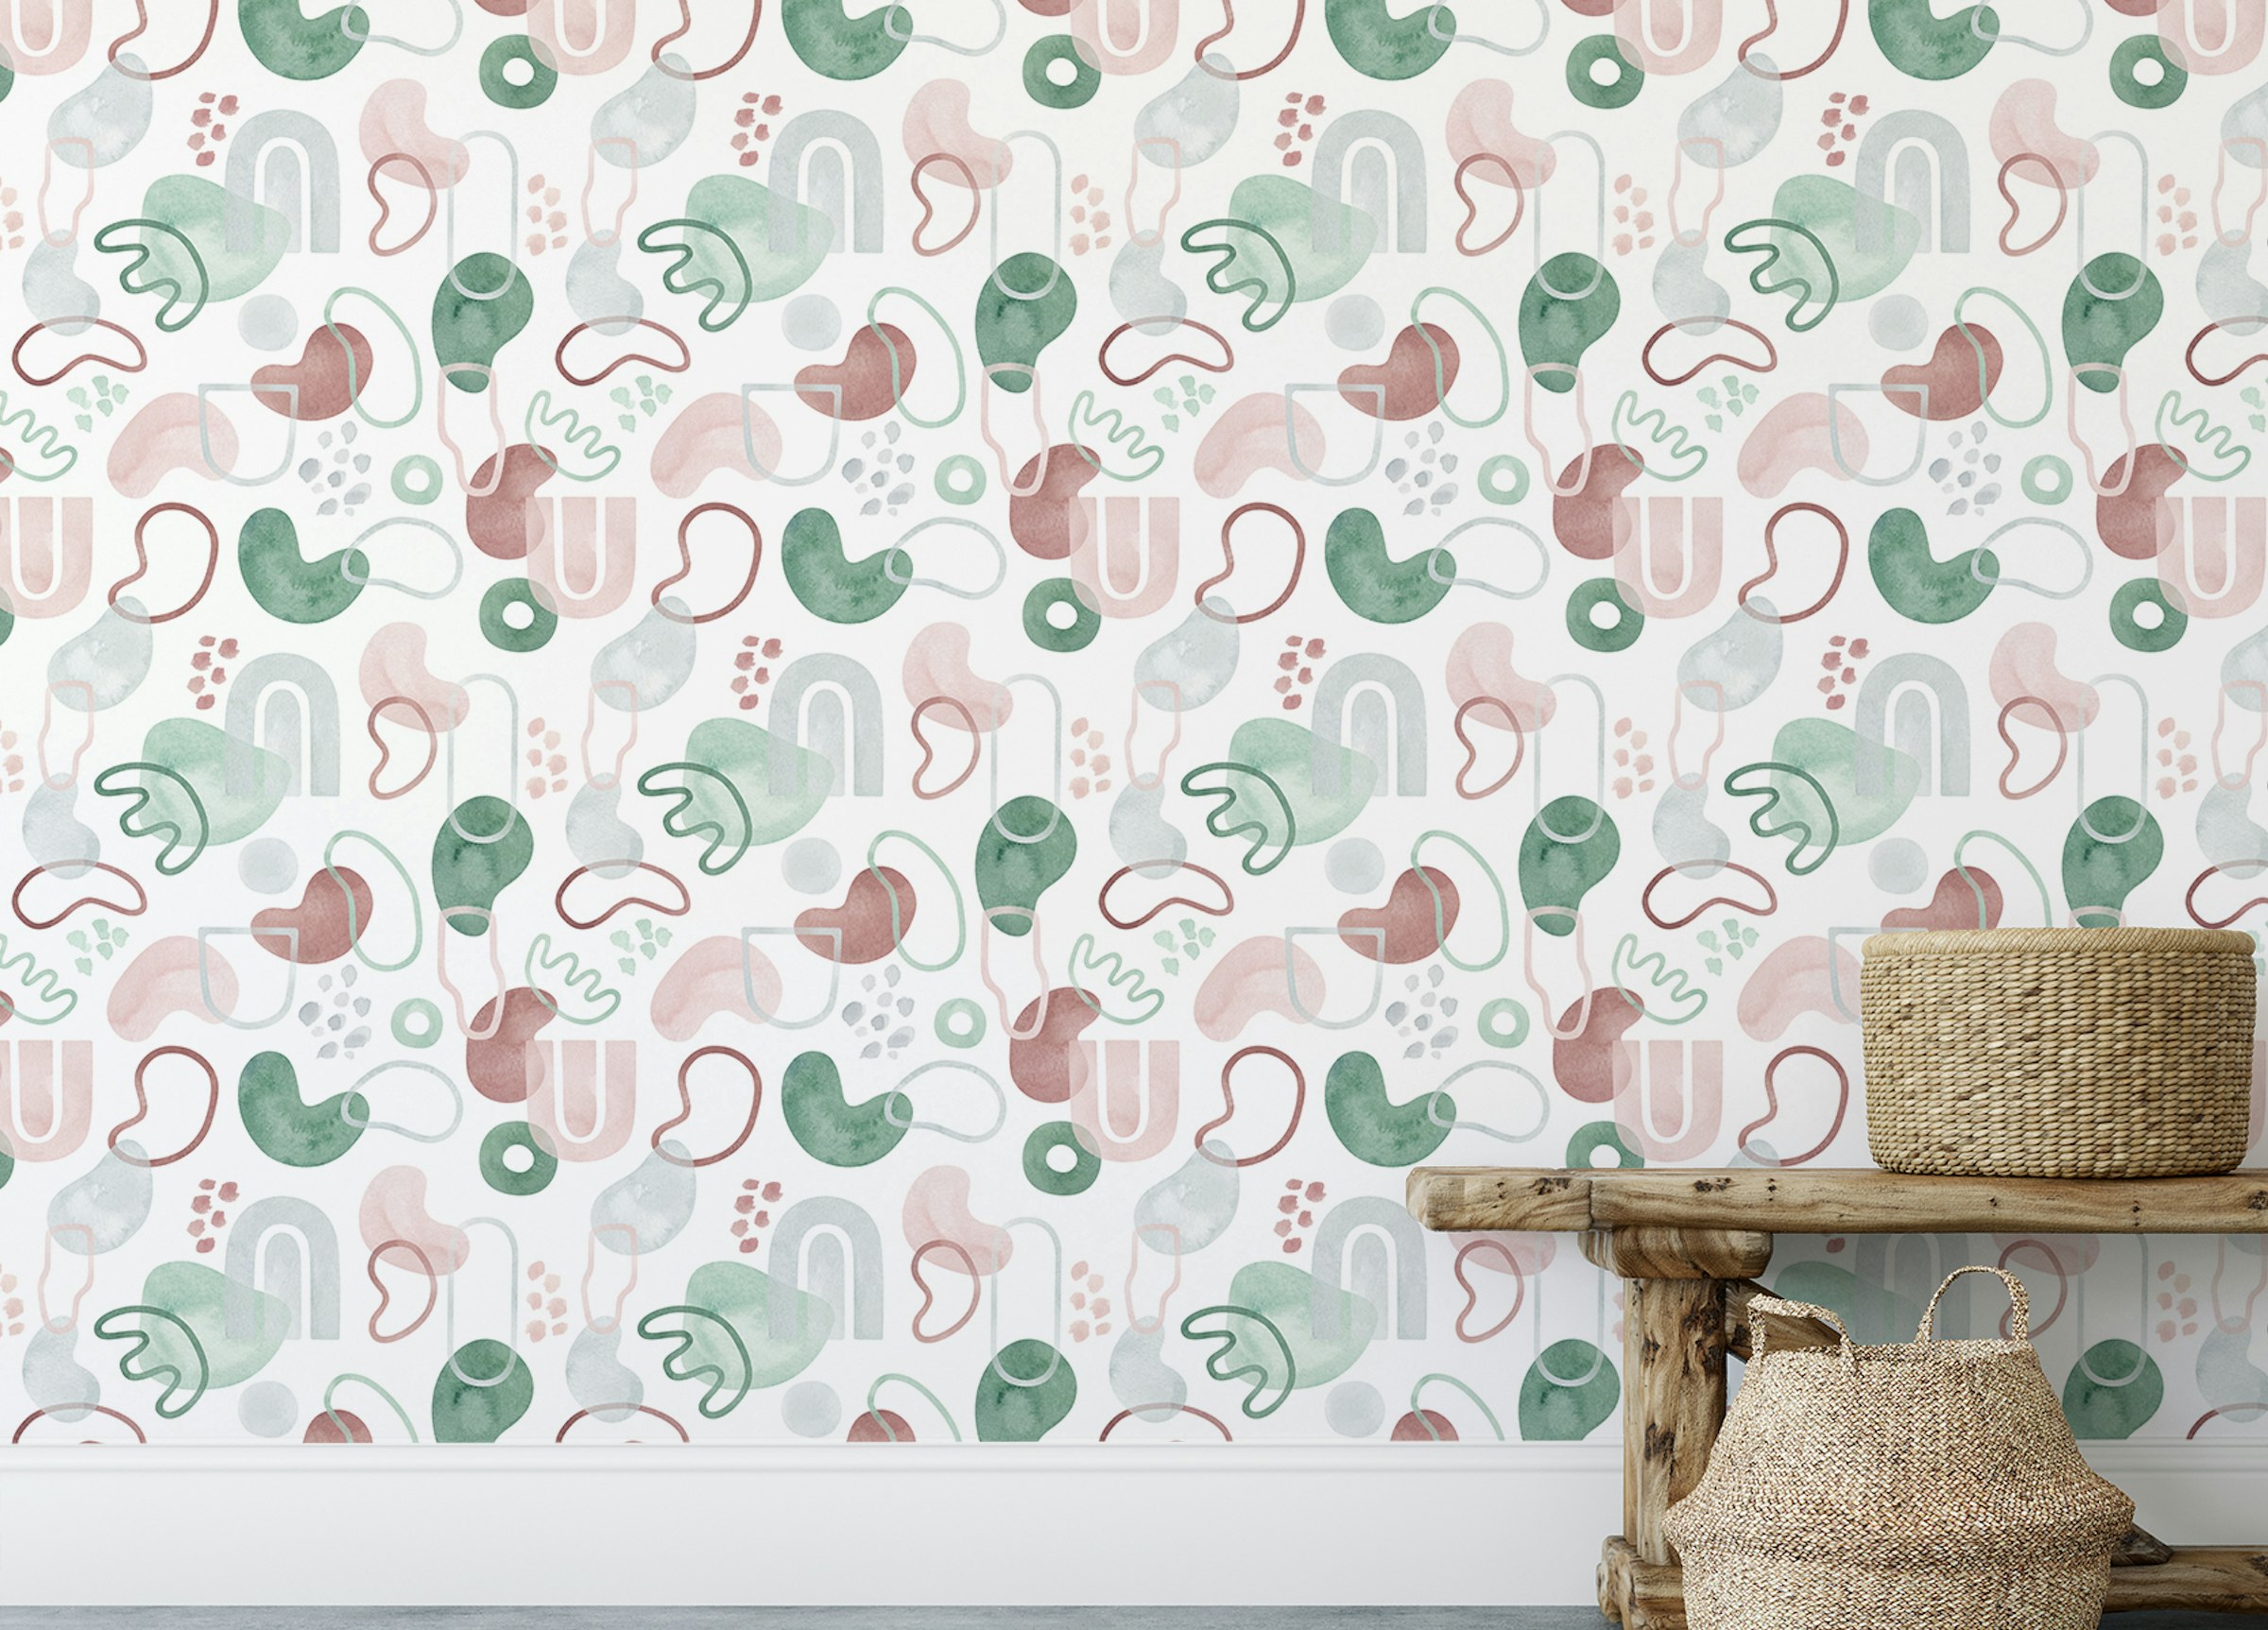 Peel and Stick Repeated Pattern Design Wallpaper for Walls